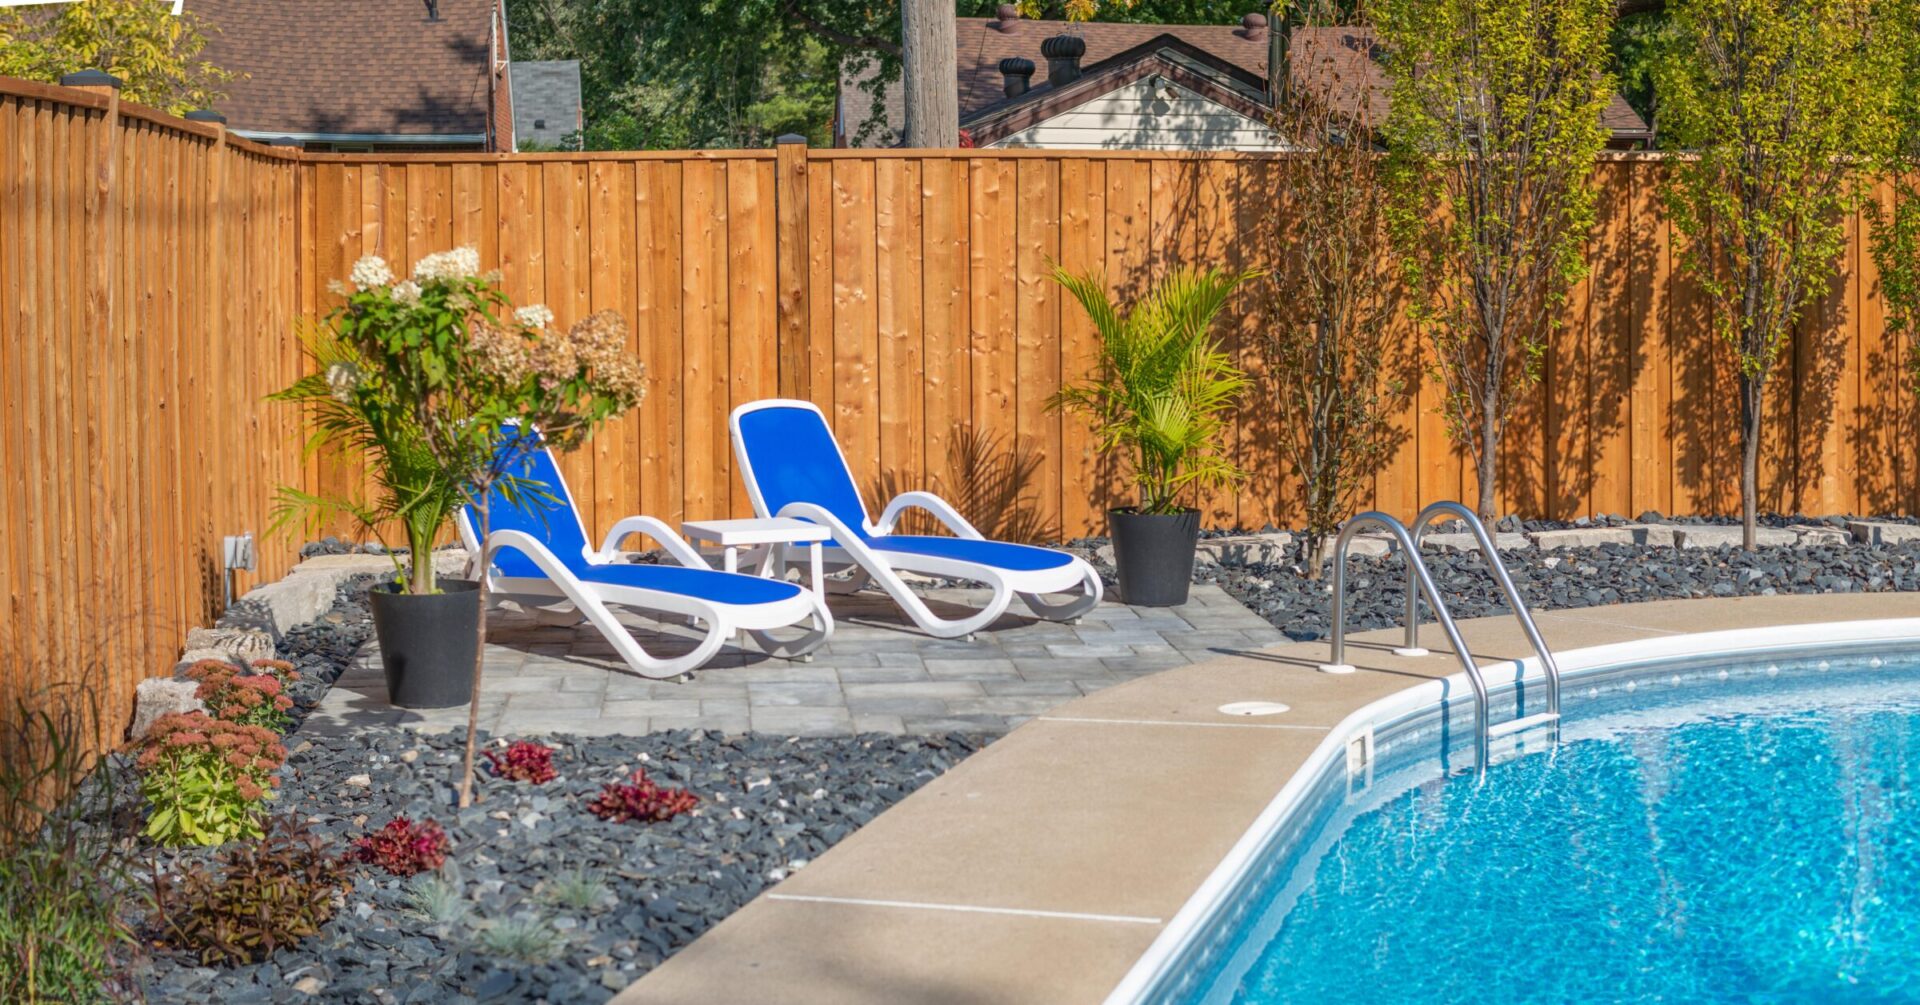 A backyard with a swimming pool, blue lounge chairs, landscaped with rocks and plants, surrounded by a tall wooden fence, under a clear sky.